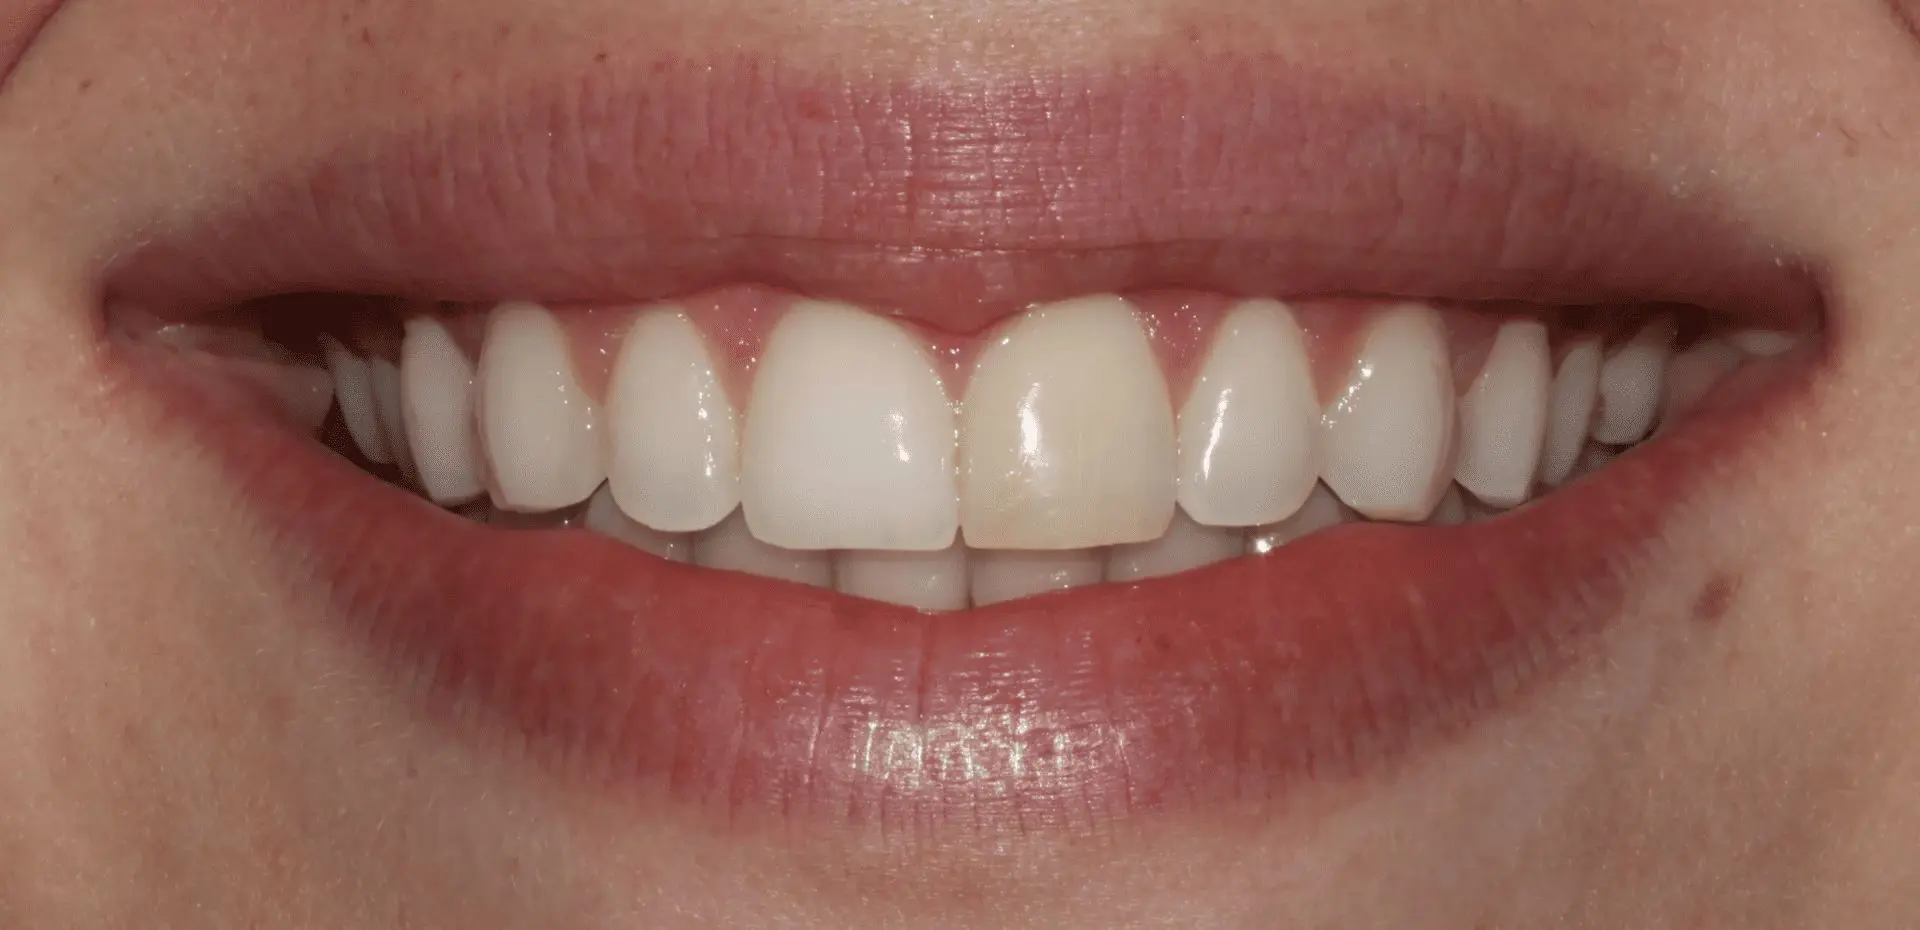 A close up of the teeth with white teeth